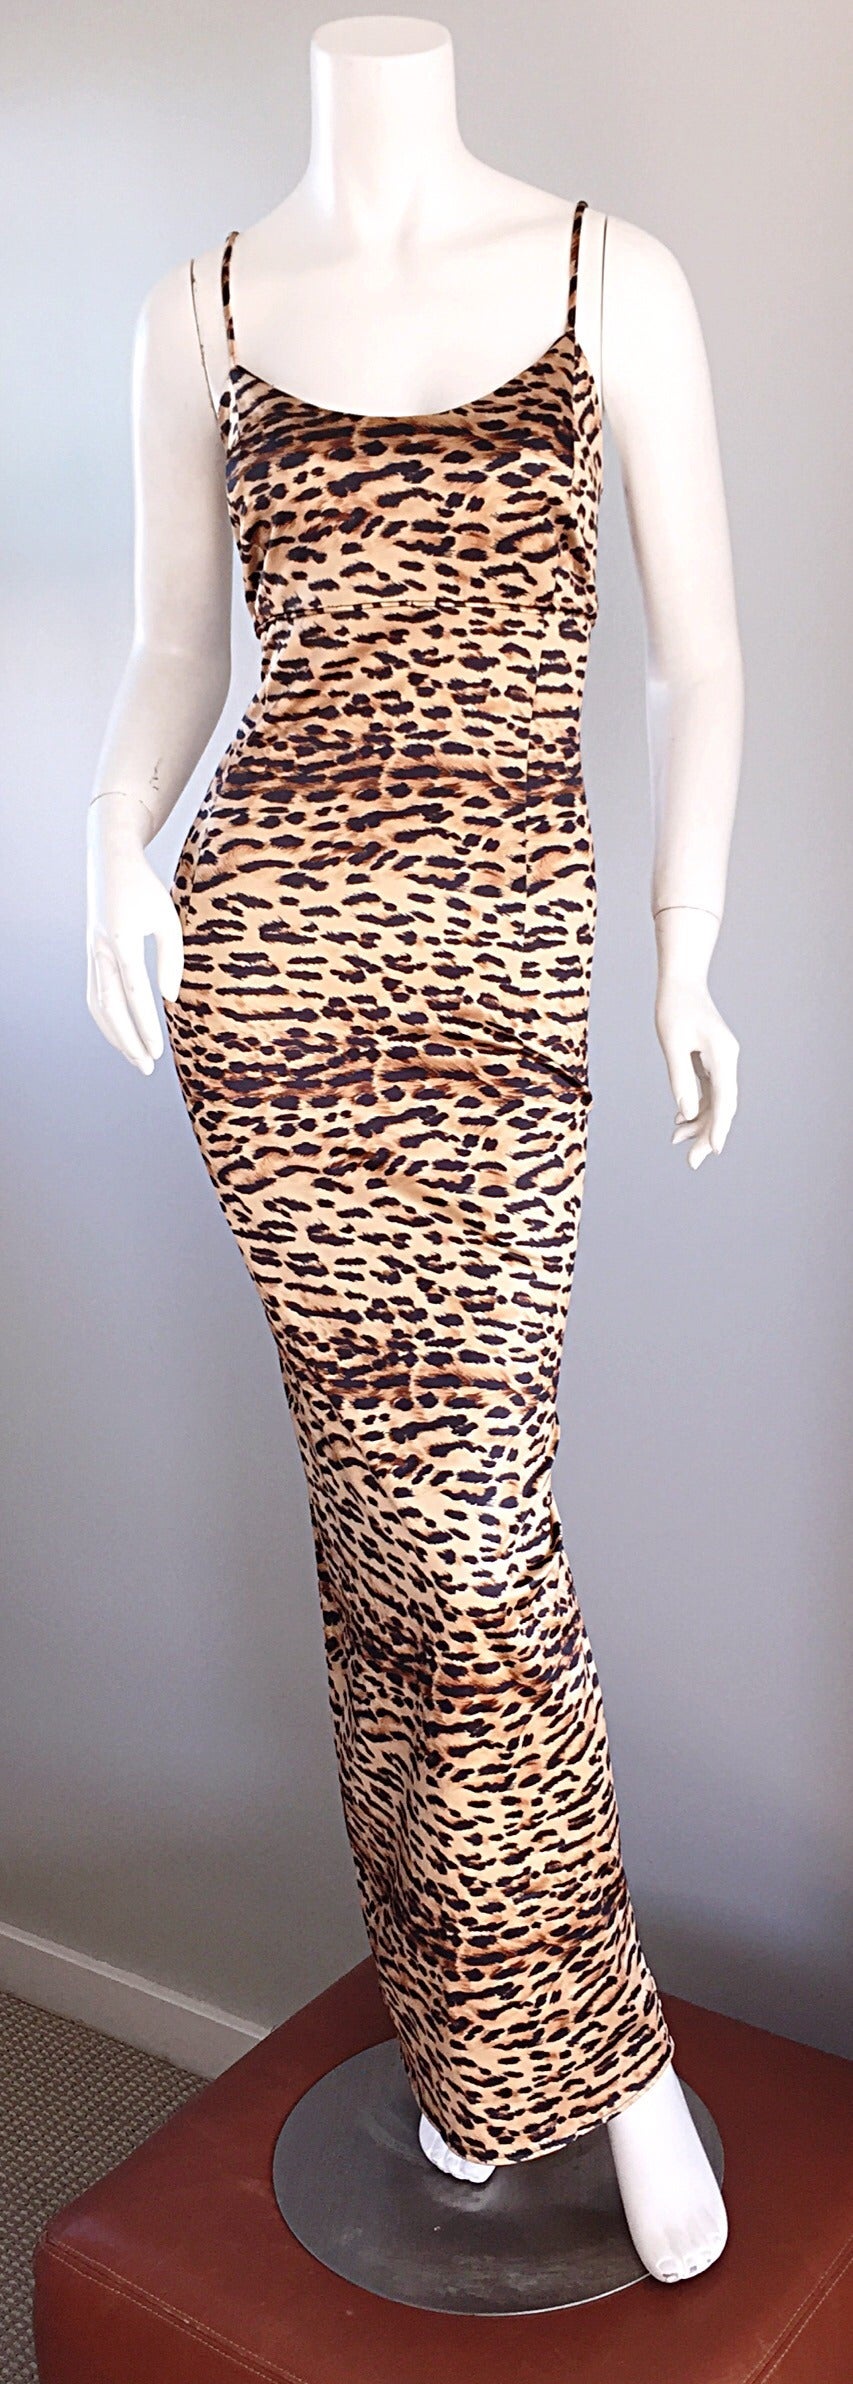 Iconic and Rare 1990s Dolce & Gabbana Leopard Print Vintage Bodycon Dress 3